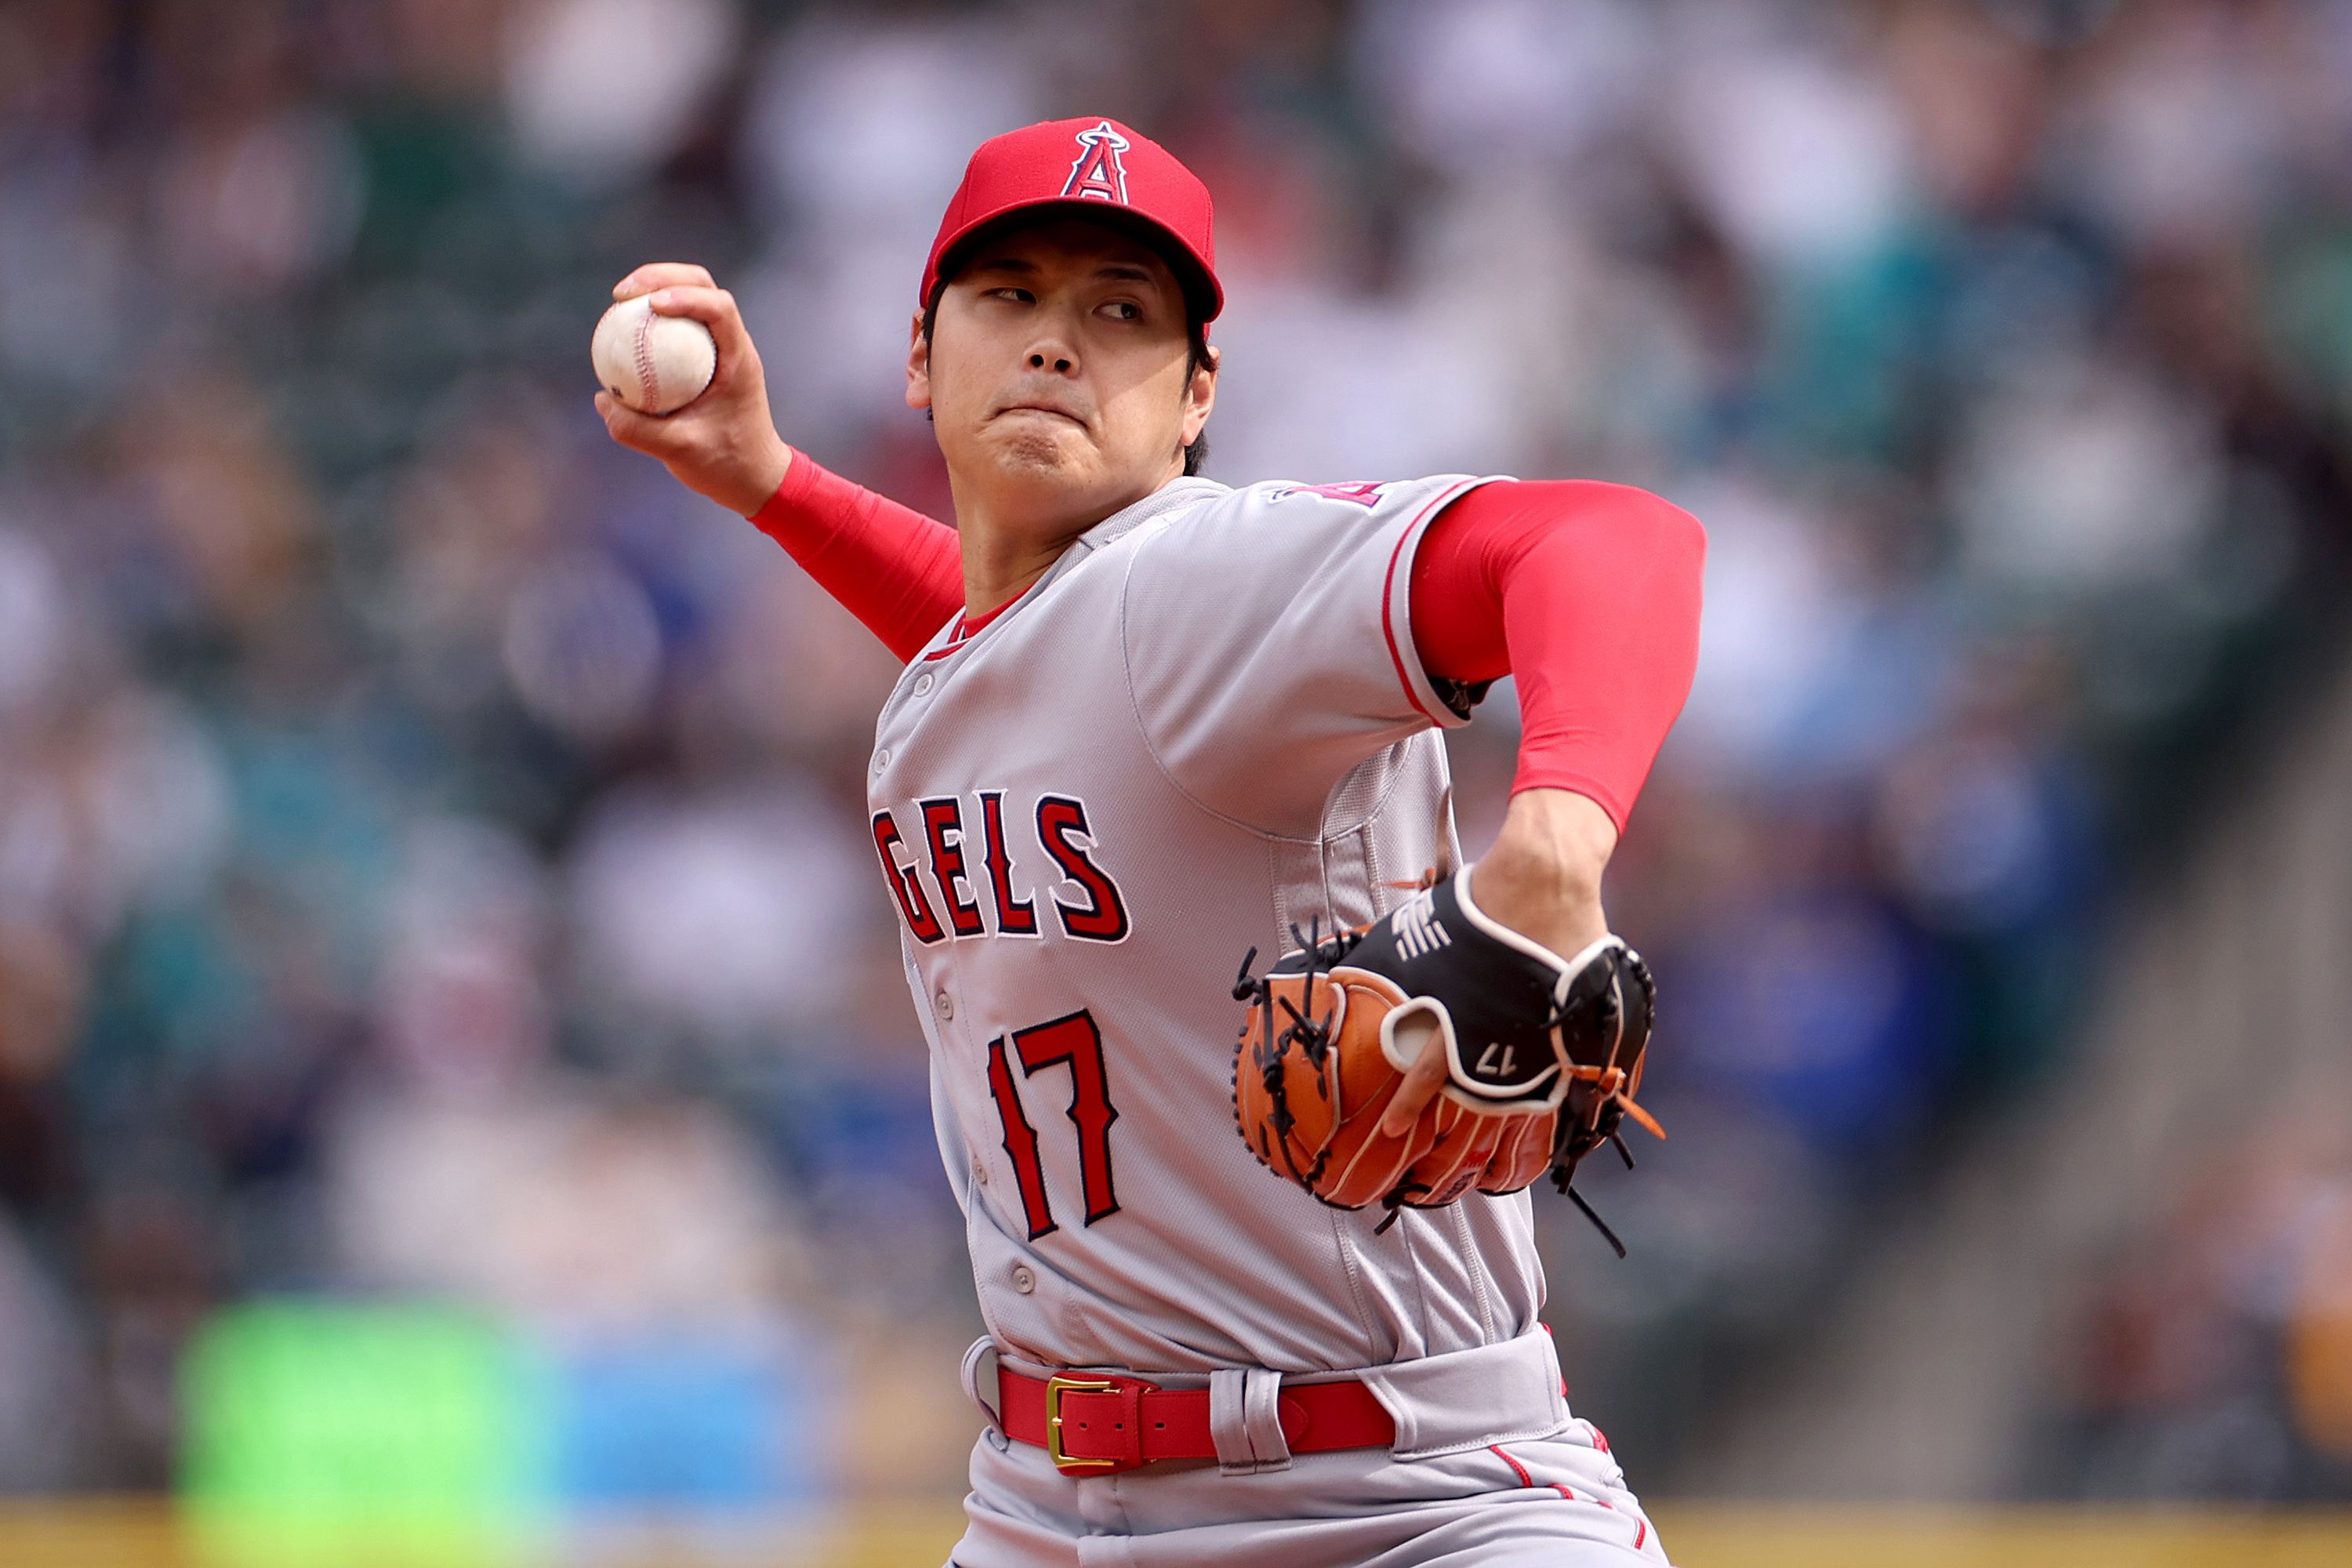 Could the San Diego Padres possibly sign Shohei Ohtani?